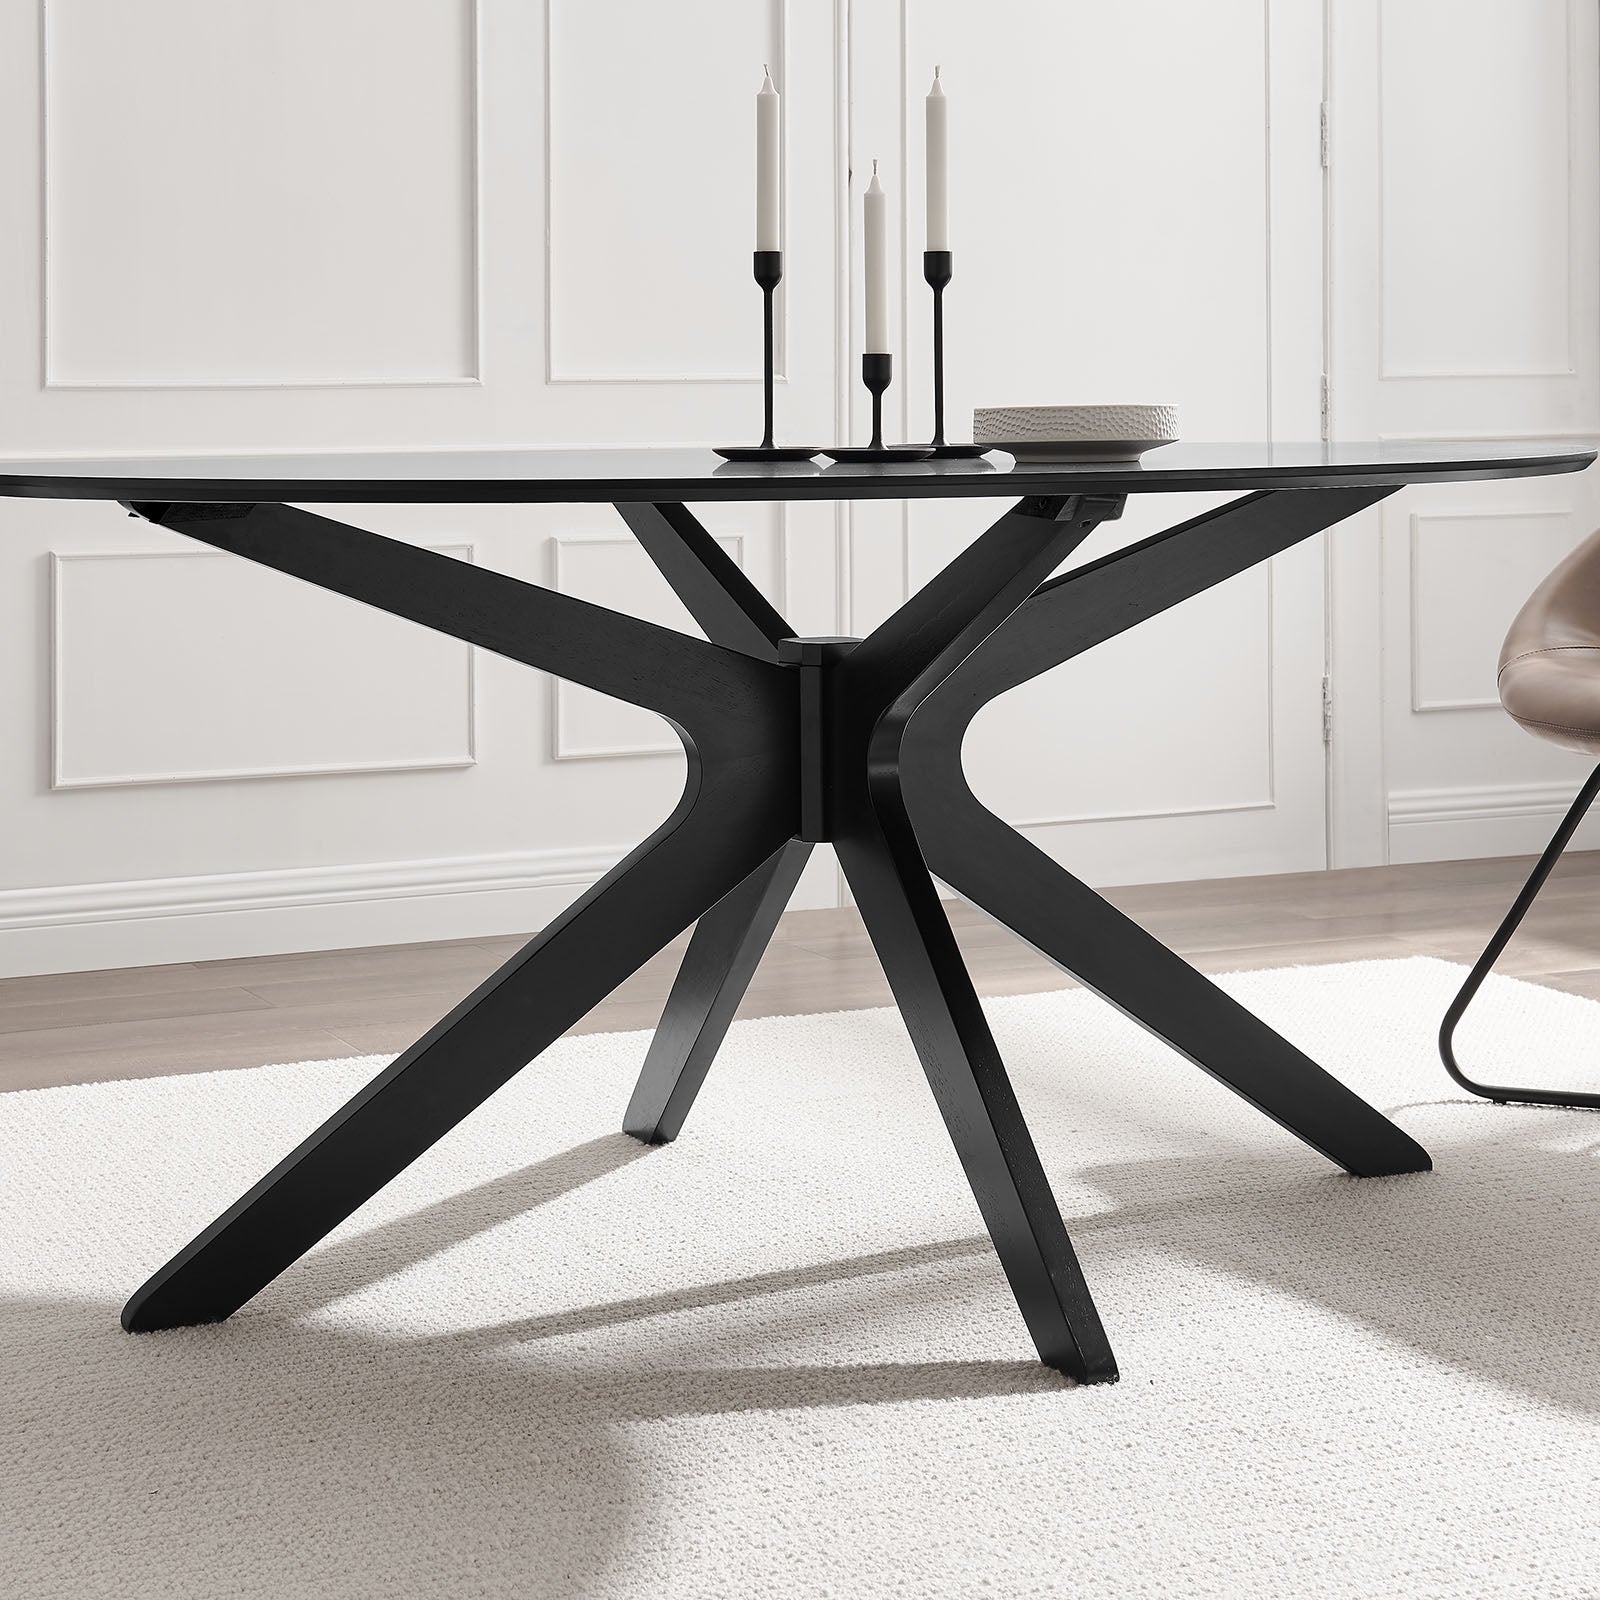 Traverse 63" Oval Dining Table